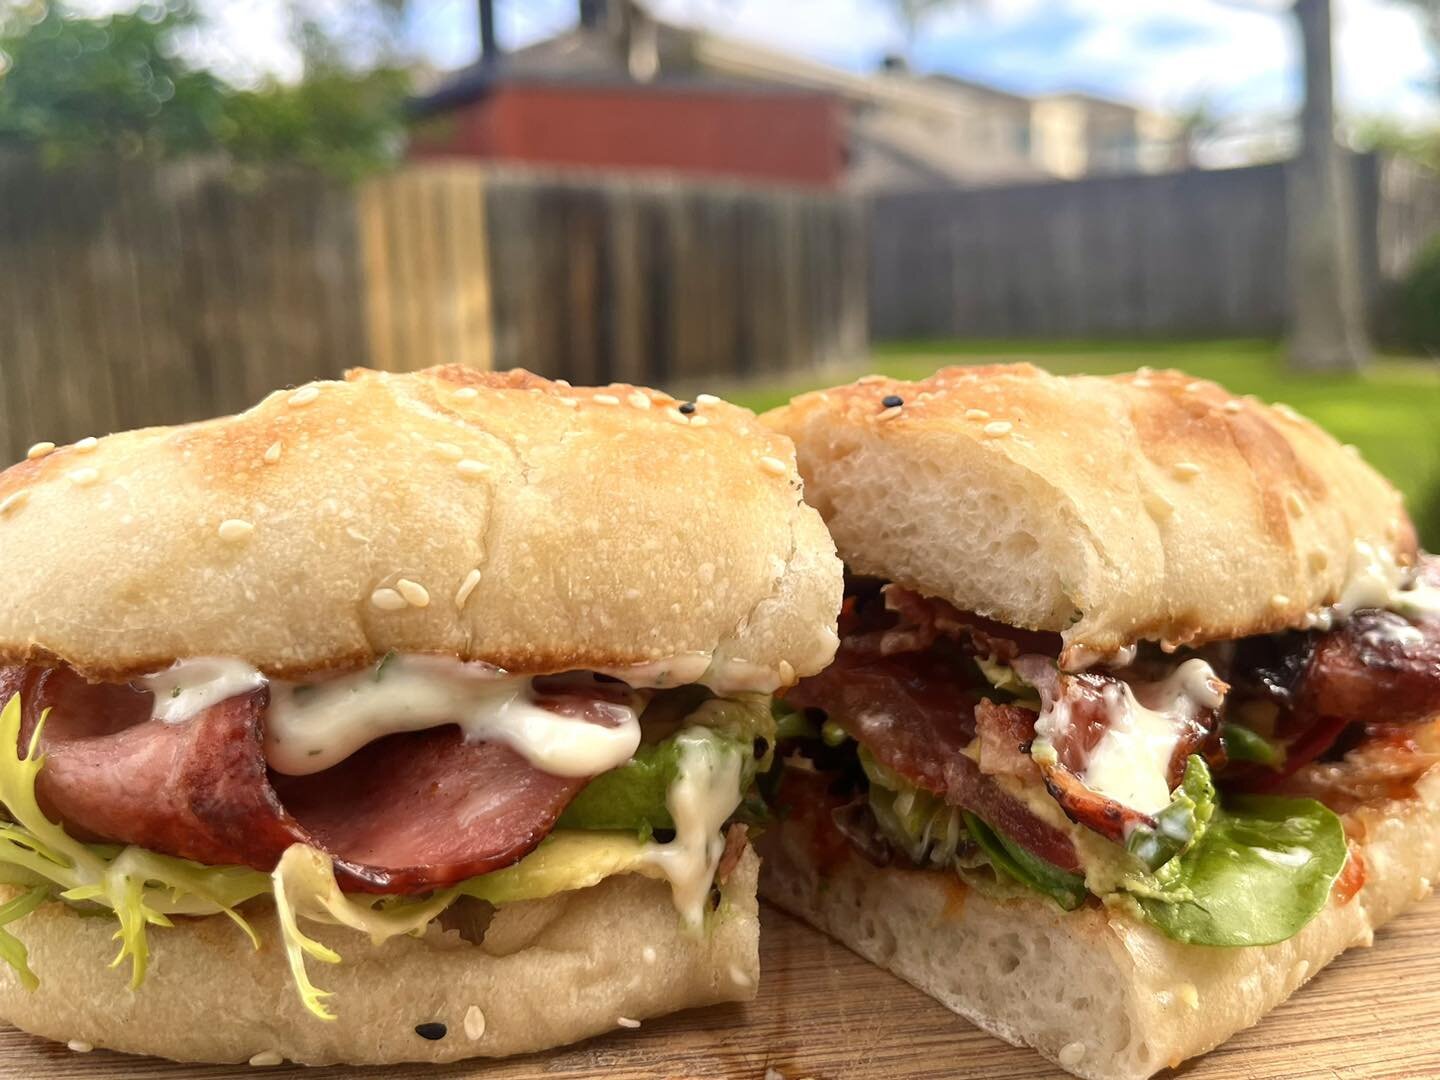 Craving a burst of flavor? Don't miss out on our Vietnamese Pork Roll or BLAT! 
These delights have been satisfying taste buds since day one!
✨ Fun fact: Our house-made aiolis are crafted using Brad's secret recipe, used over an impressive 11-year sp